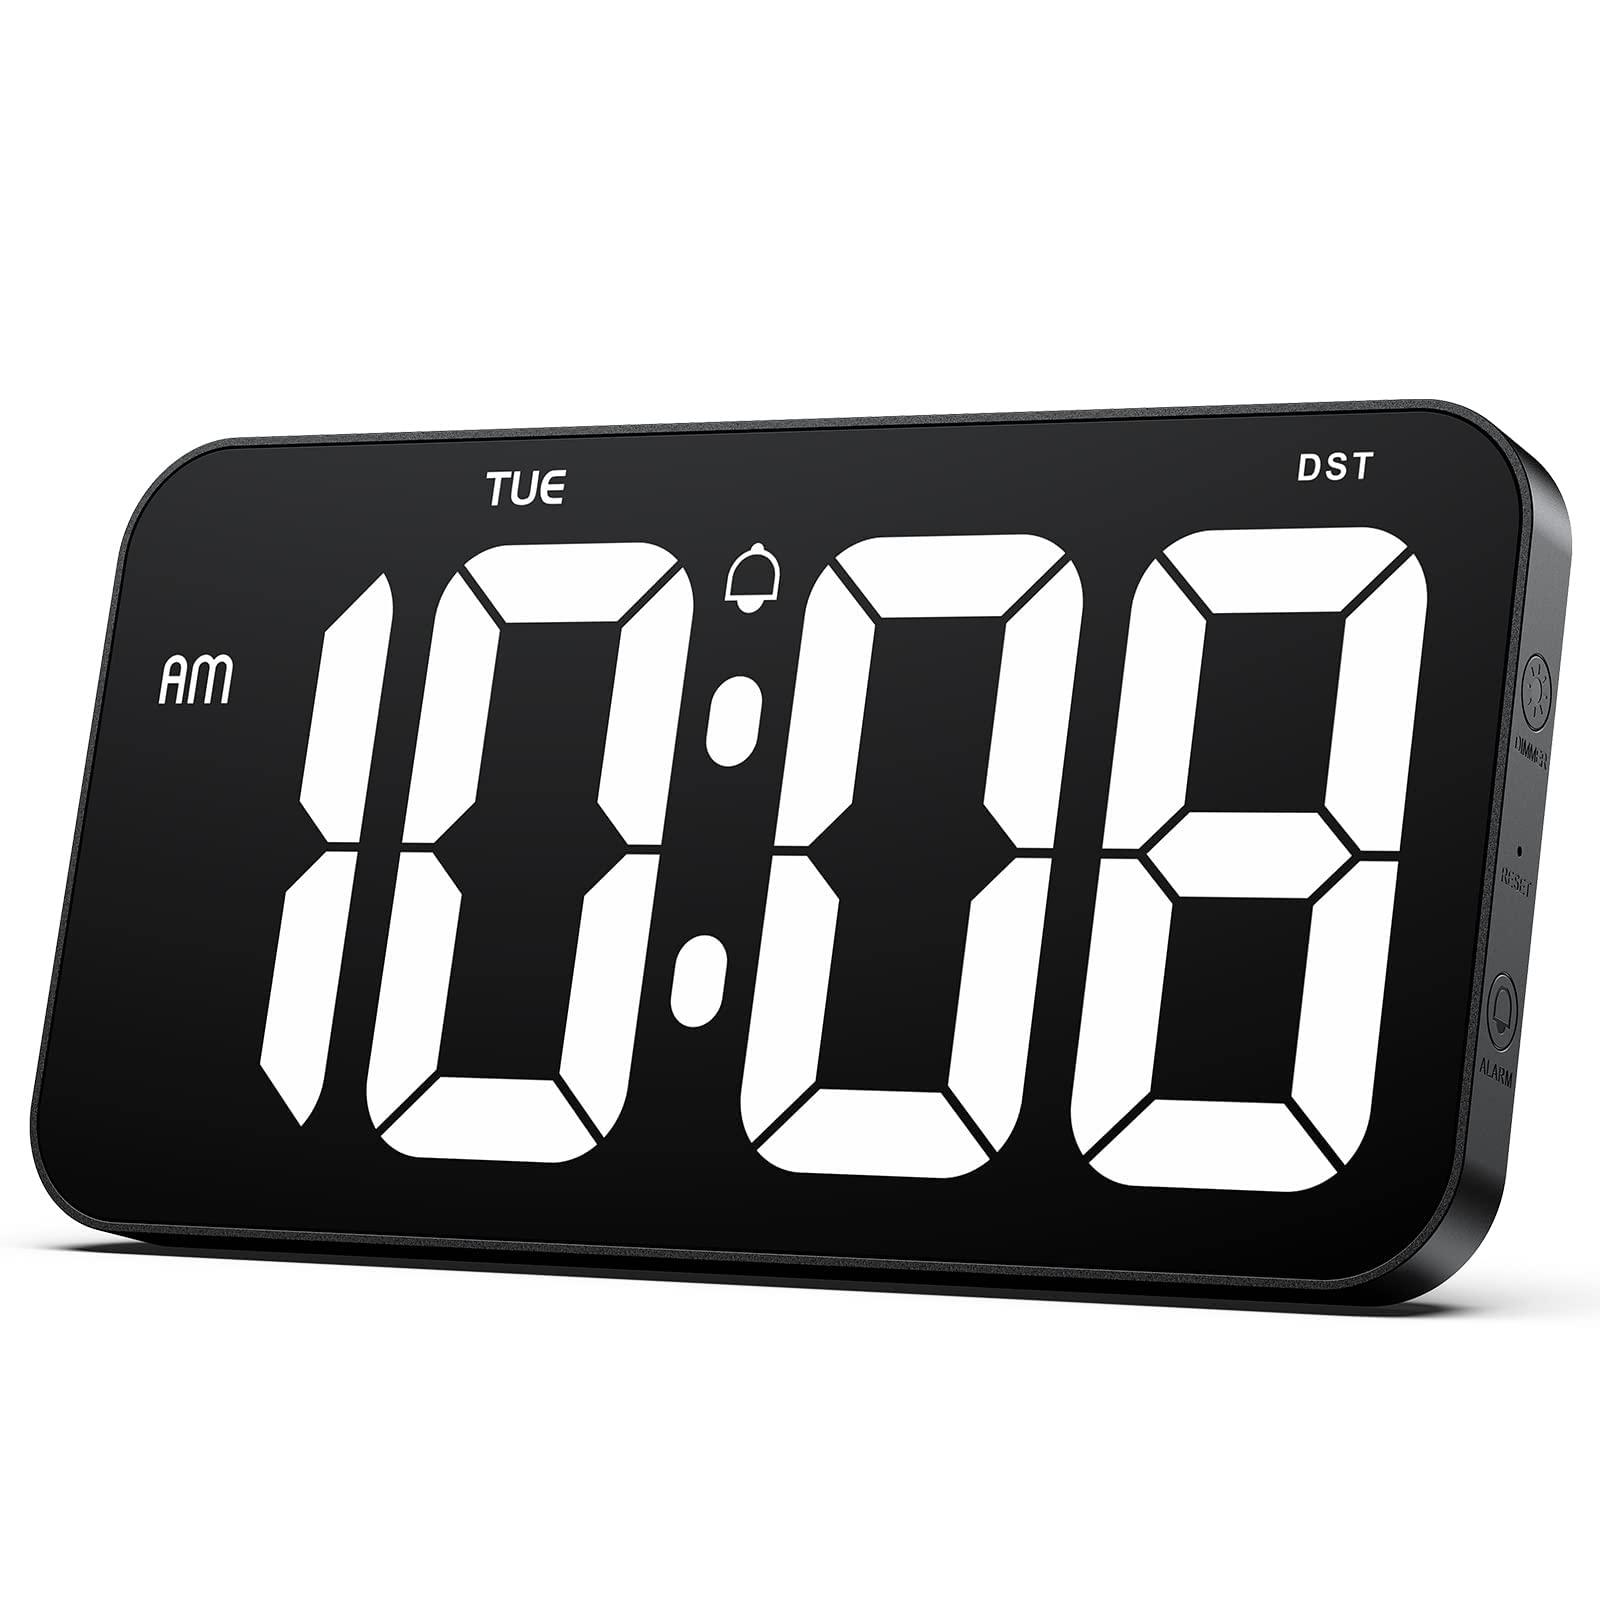 zgrmbo large digital wall clock with 4" huge clear digits - digital clock for wall with daylight saving time, auto-dimming, w